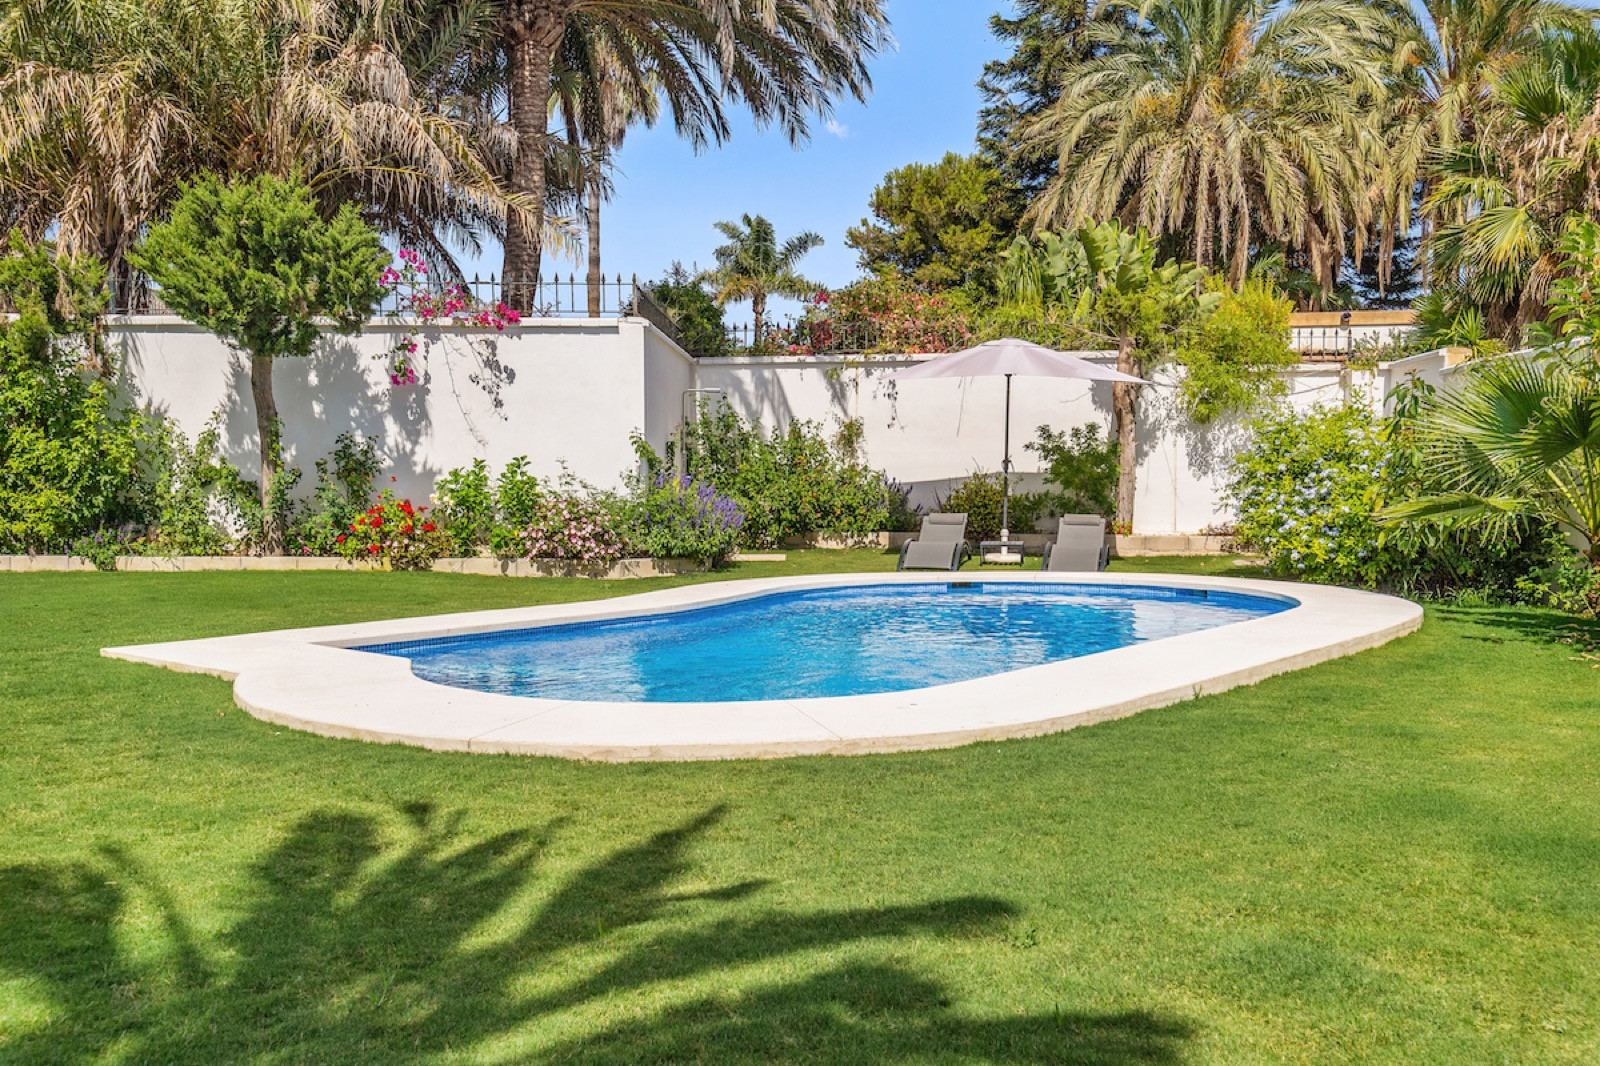 Recently refurbished villa 400m from the beach in Atalaya